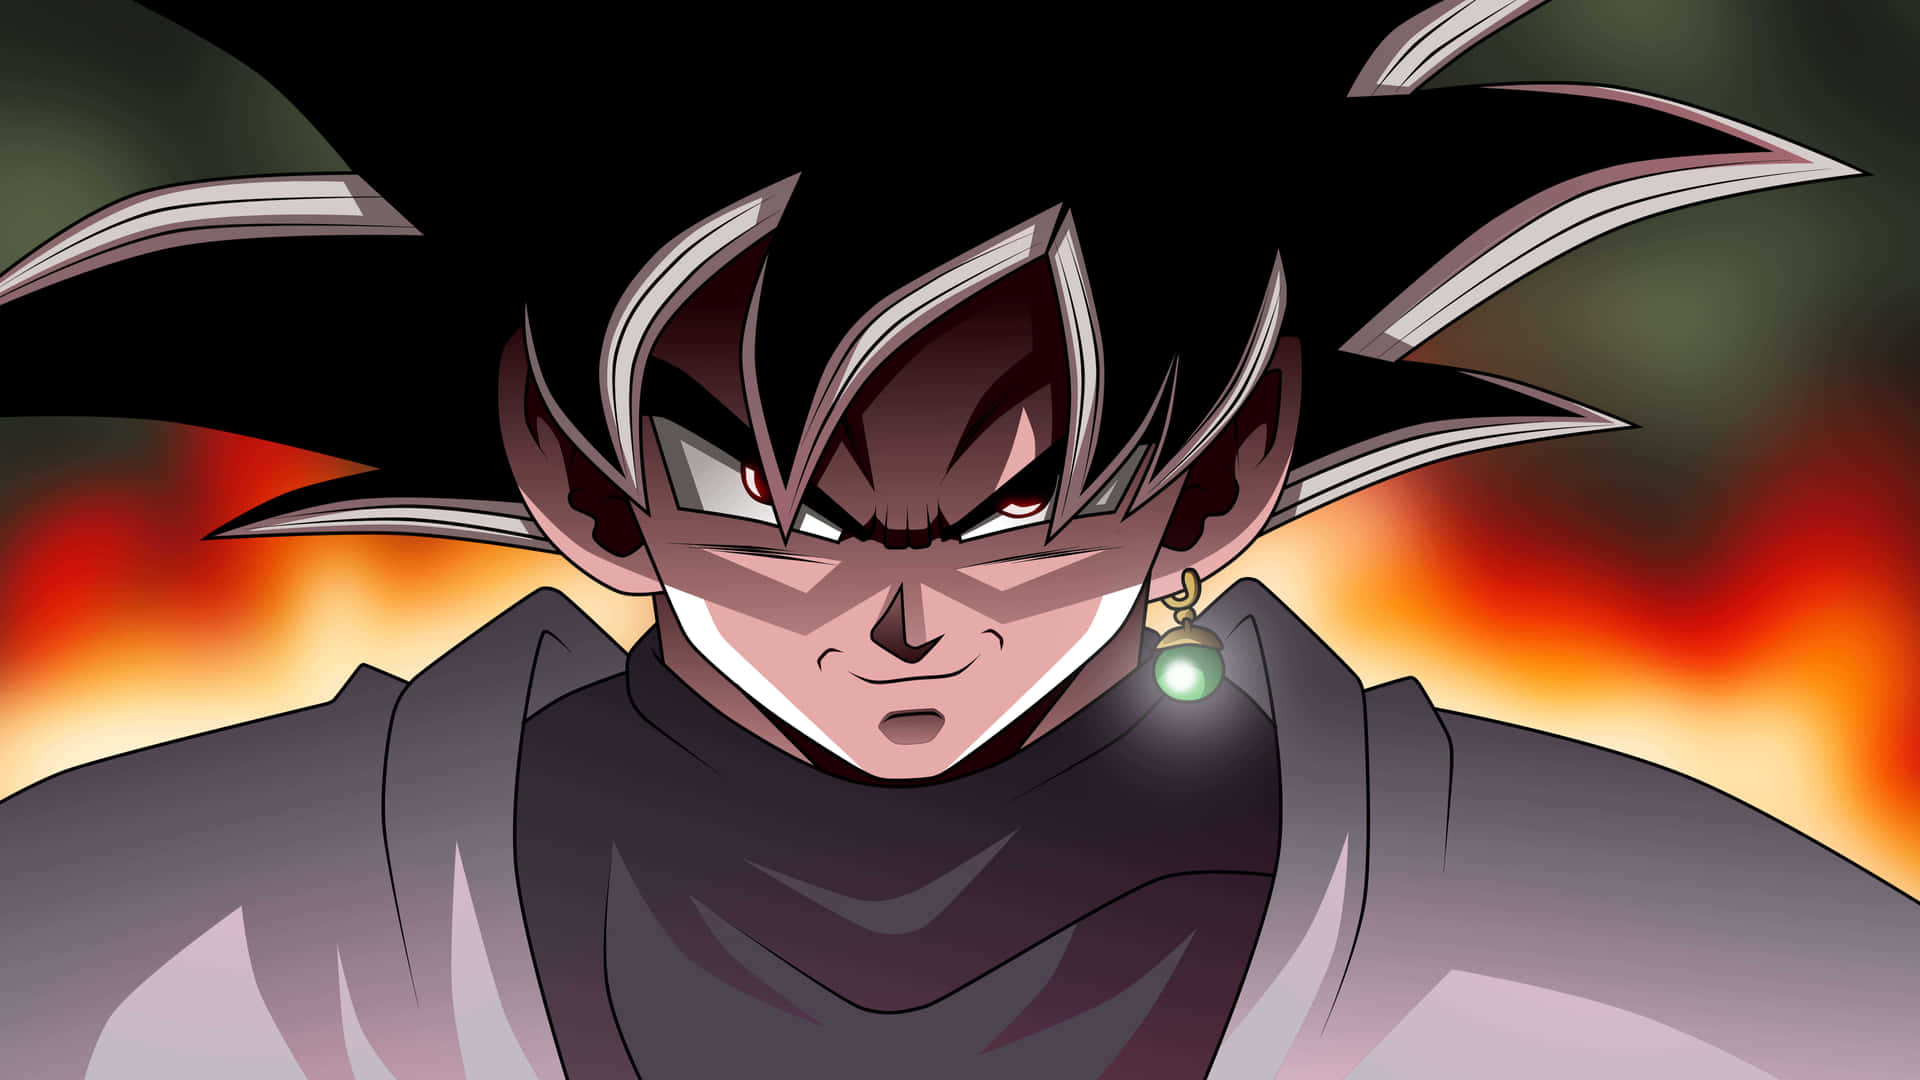 The Powerful Goku Black Is Ready To Fight!